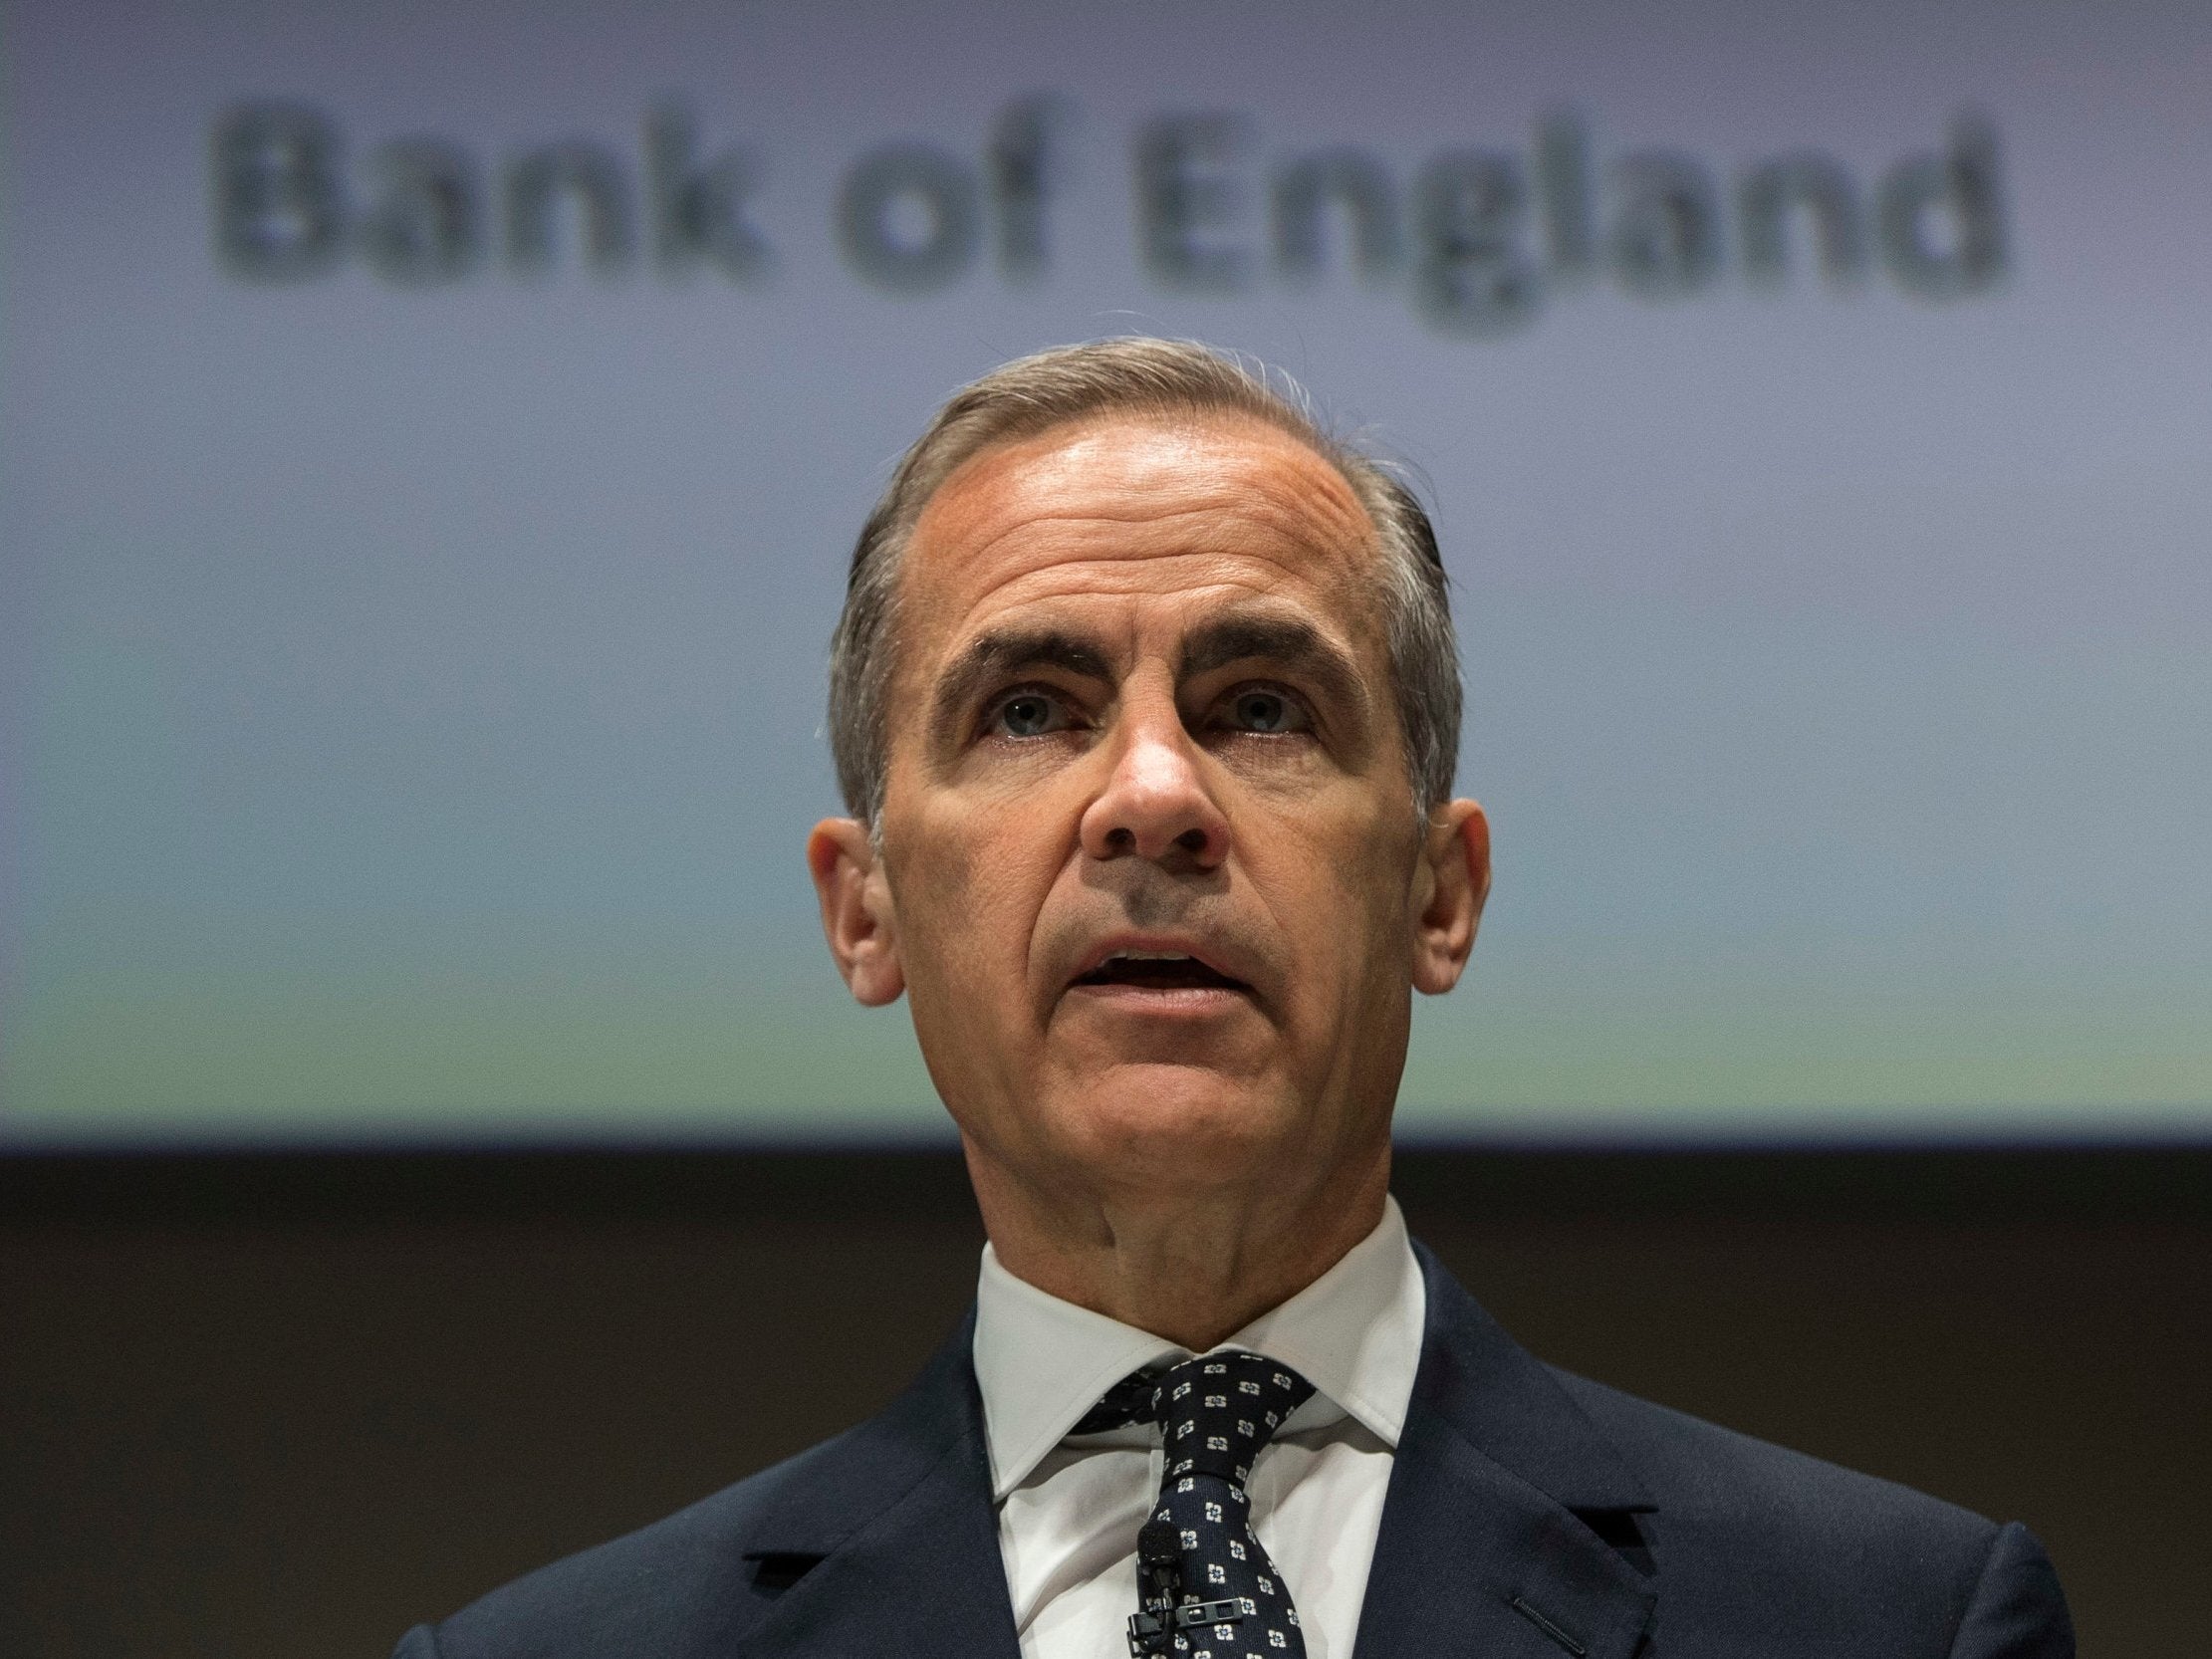 Carney was careful not to put too much emphasis on blaming Brexit